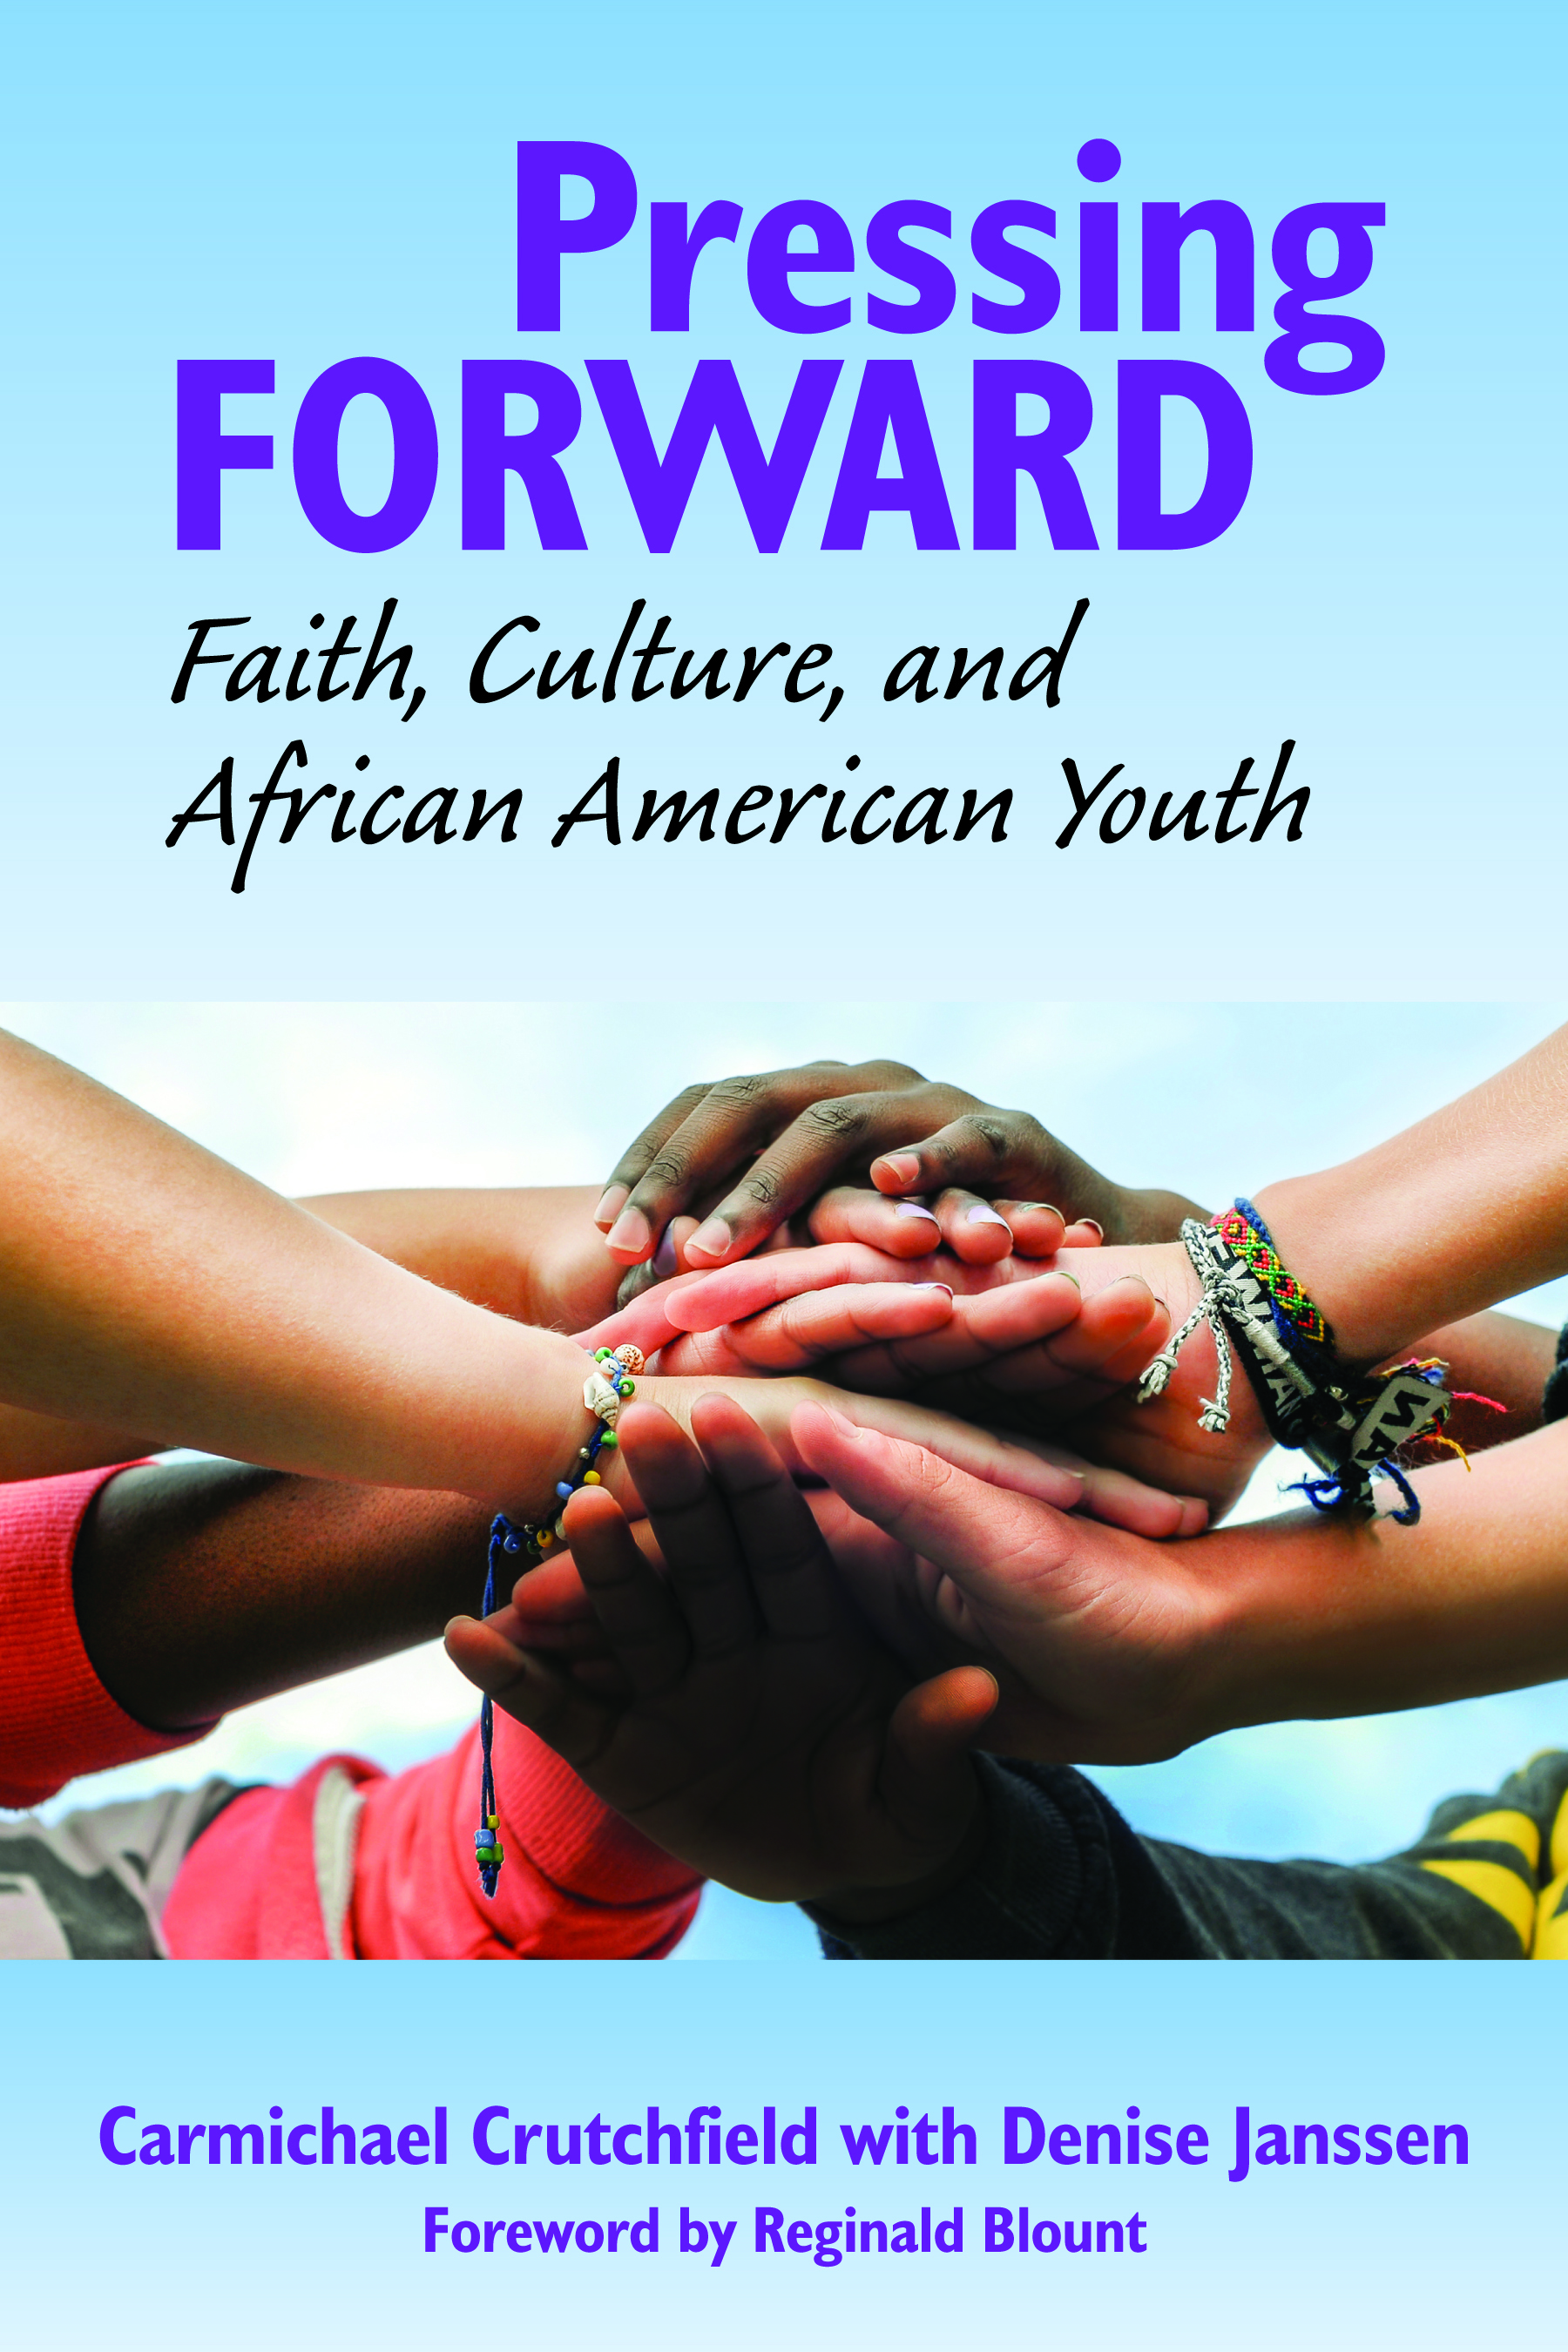 Judson Press Book Examines Cultural Impact on Youth Faith Formation in Congregations